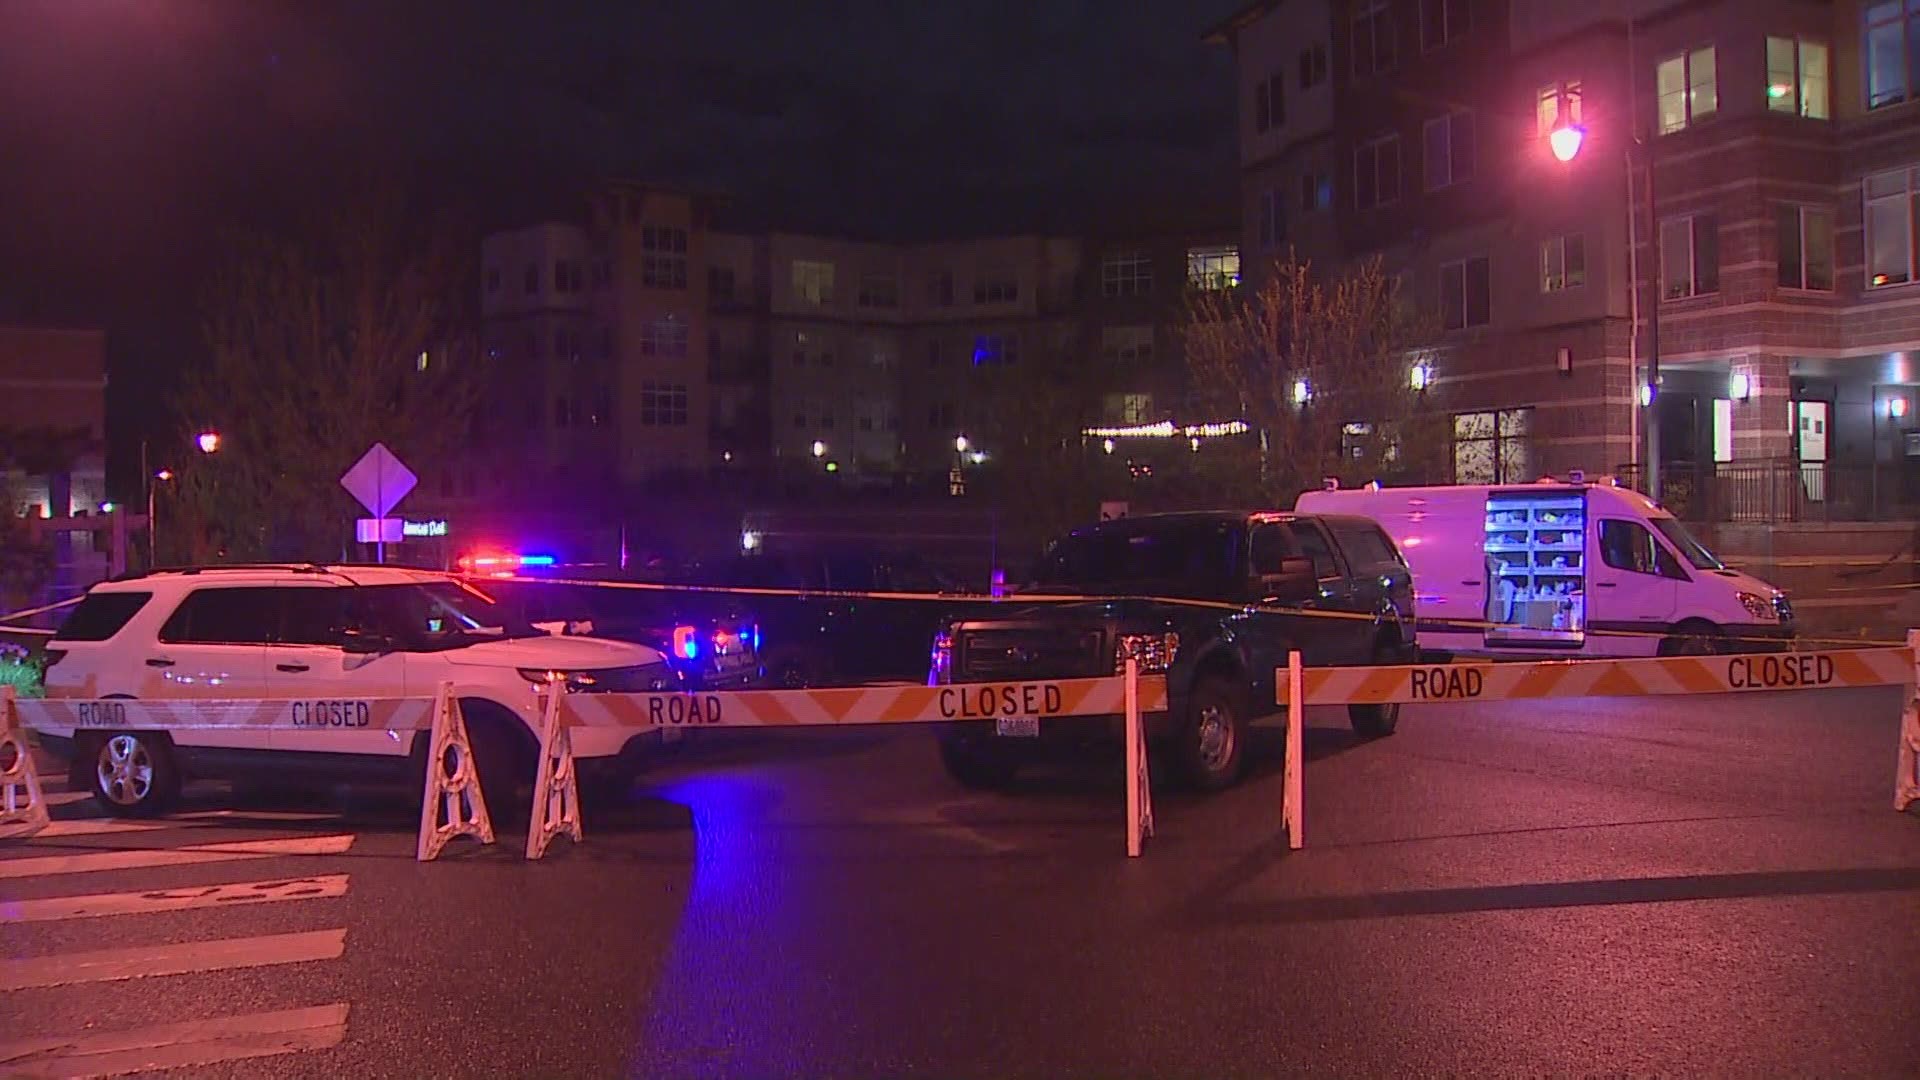 A 29-year-old man is dead after a stabbing outside an apartment building in Bothell. Police said a 25-year-old suspect was taken into custody.